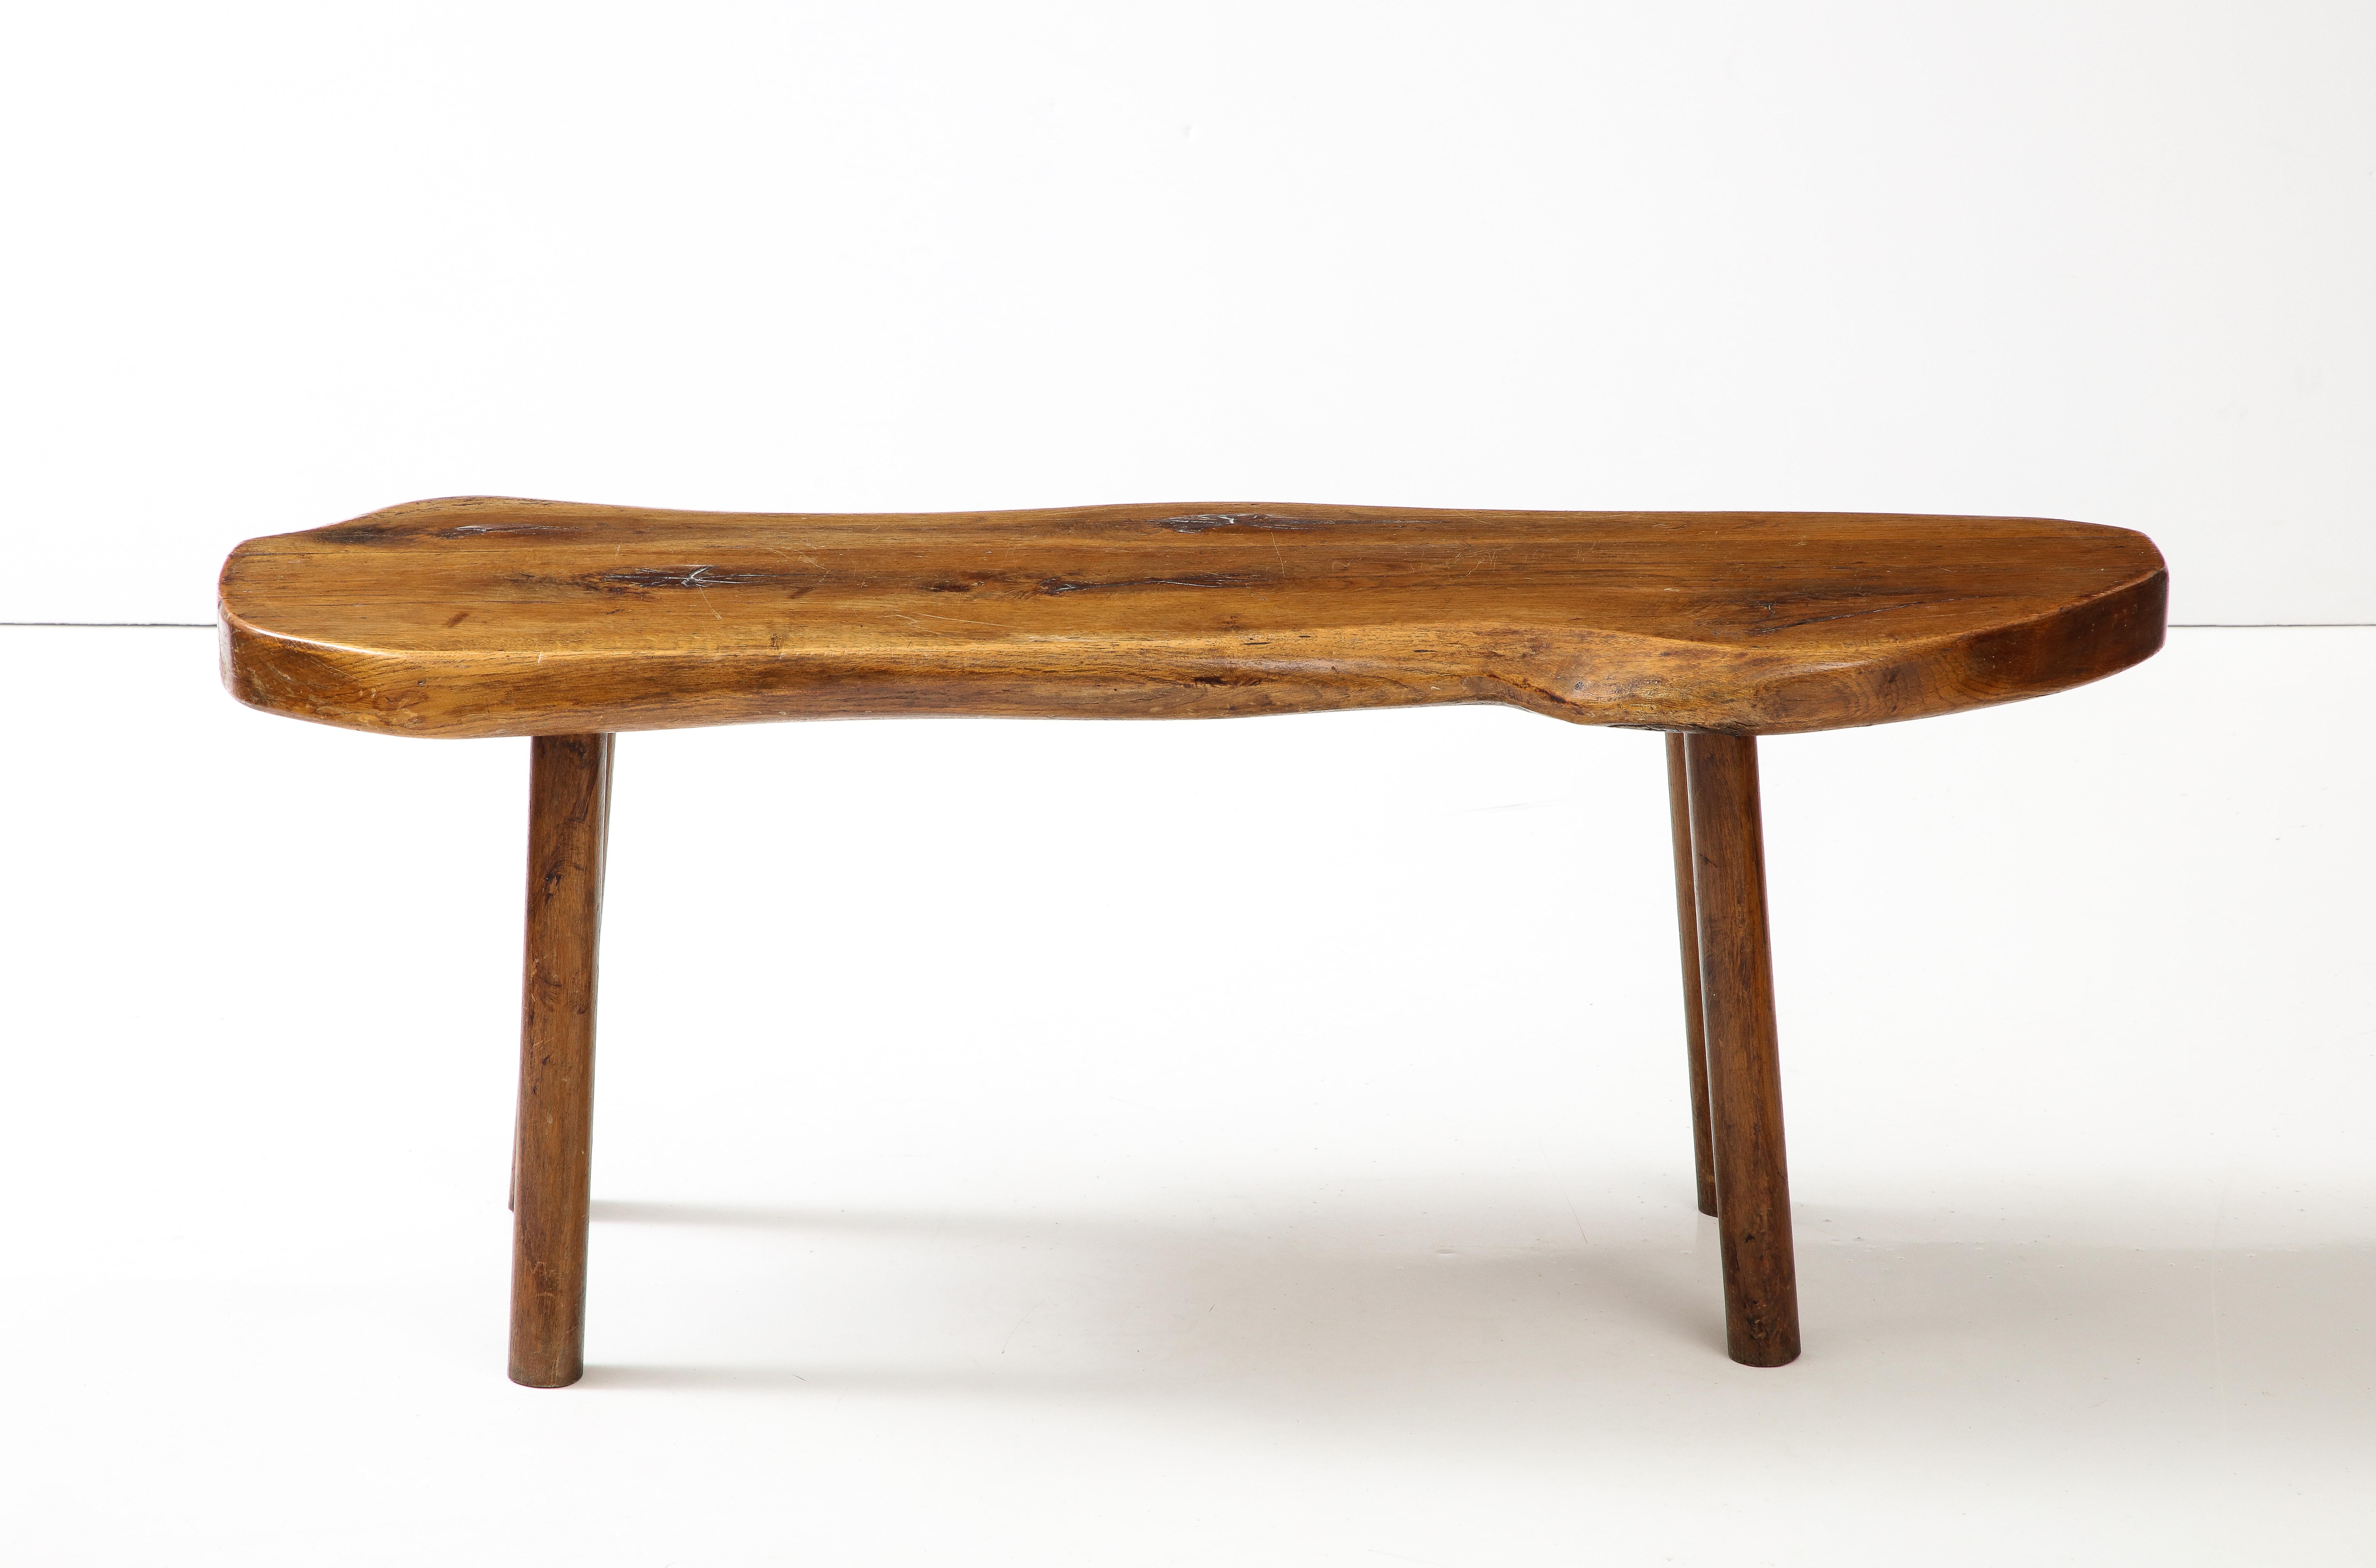 Beautiful Old Table - lovely round legs and great piece of natural unforced wood